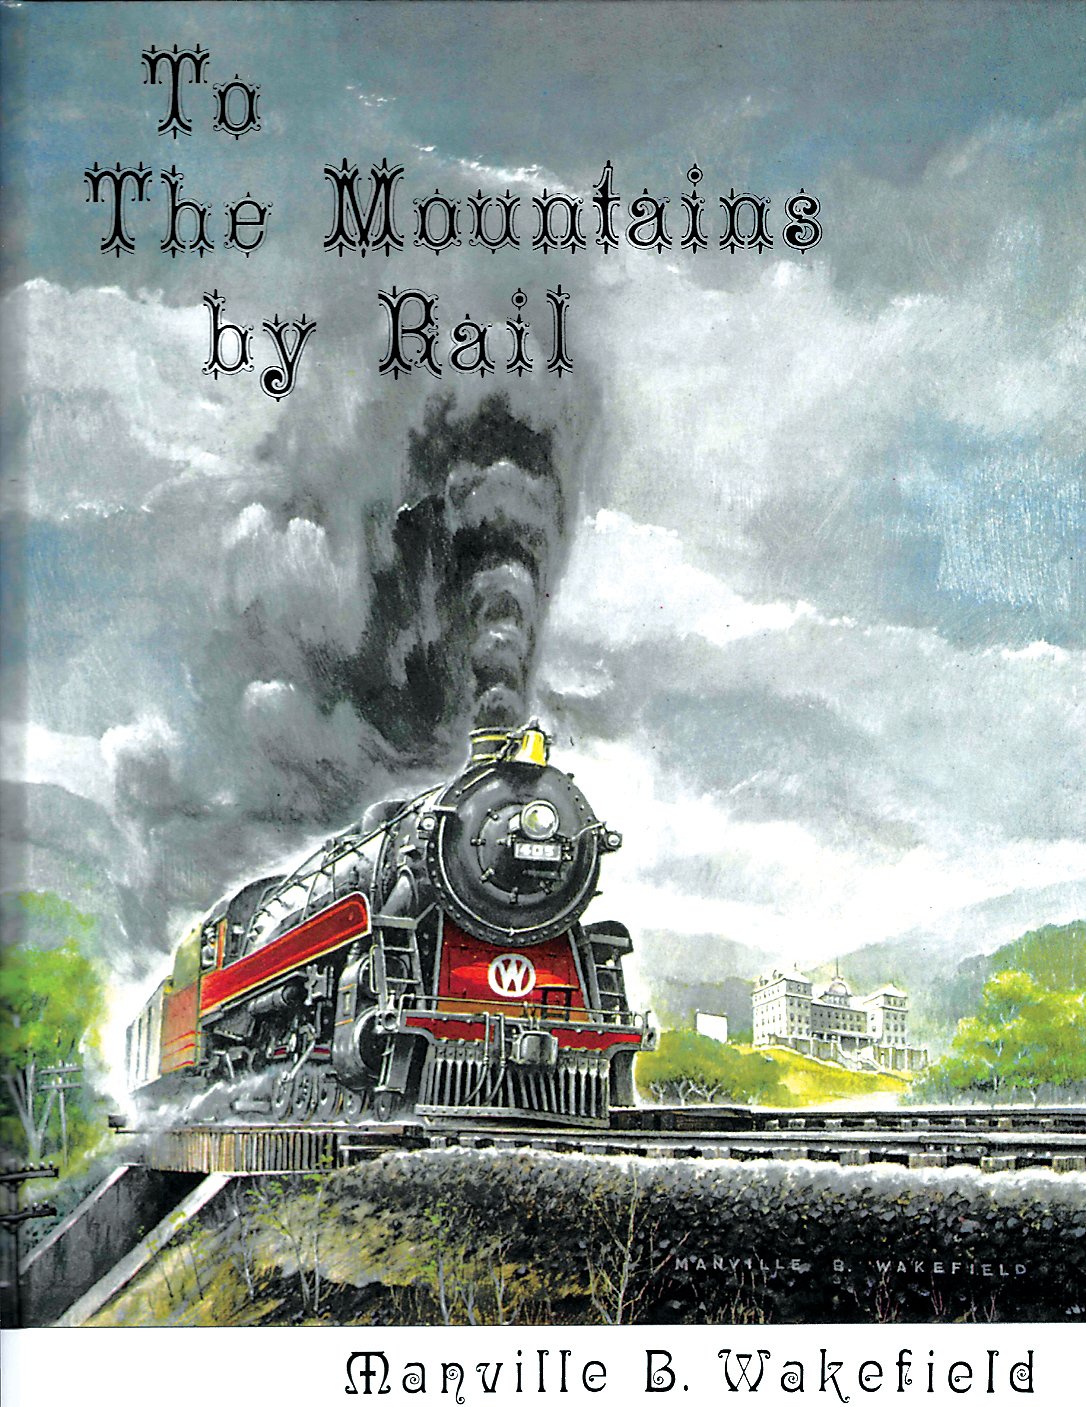 More than 50 years after its first publication, the iconic book, “To The Mountains by Rail” has been reprinted by Load ‘N Go Press.